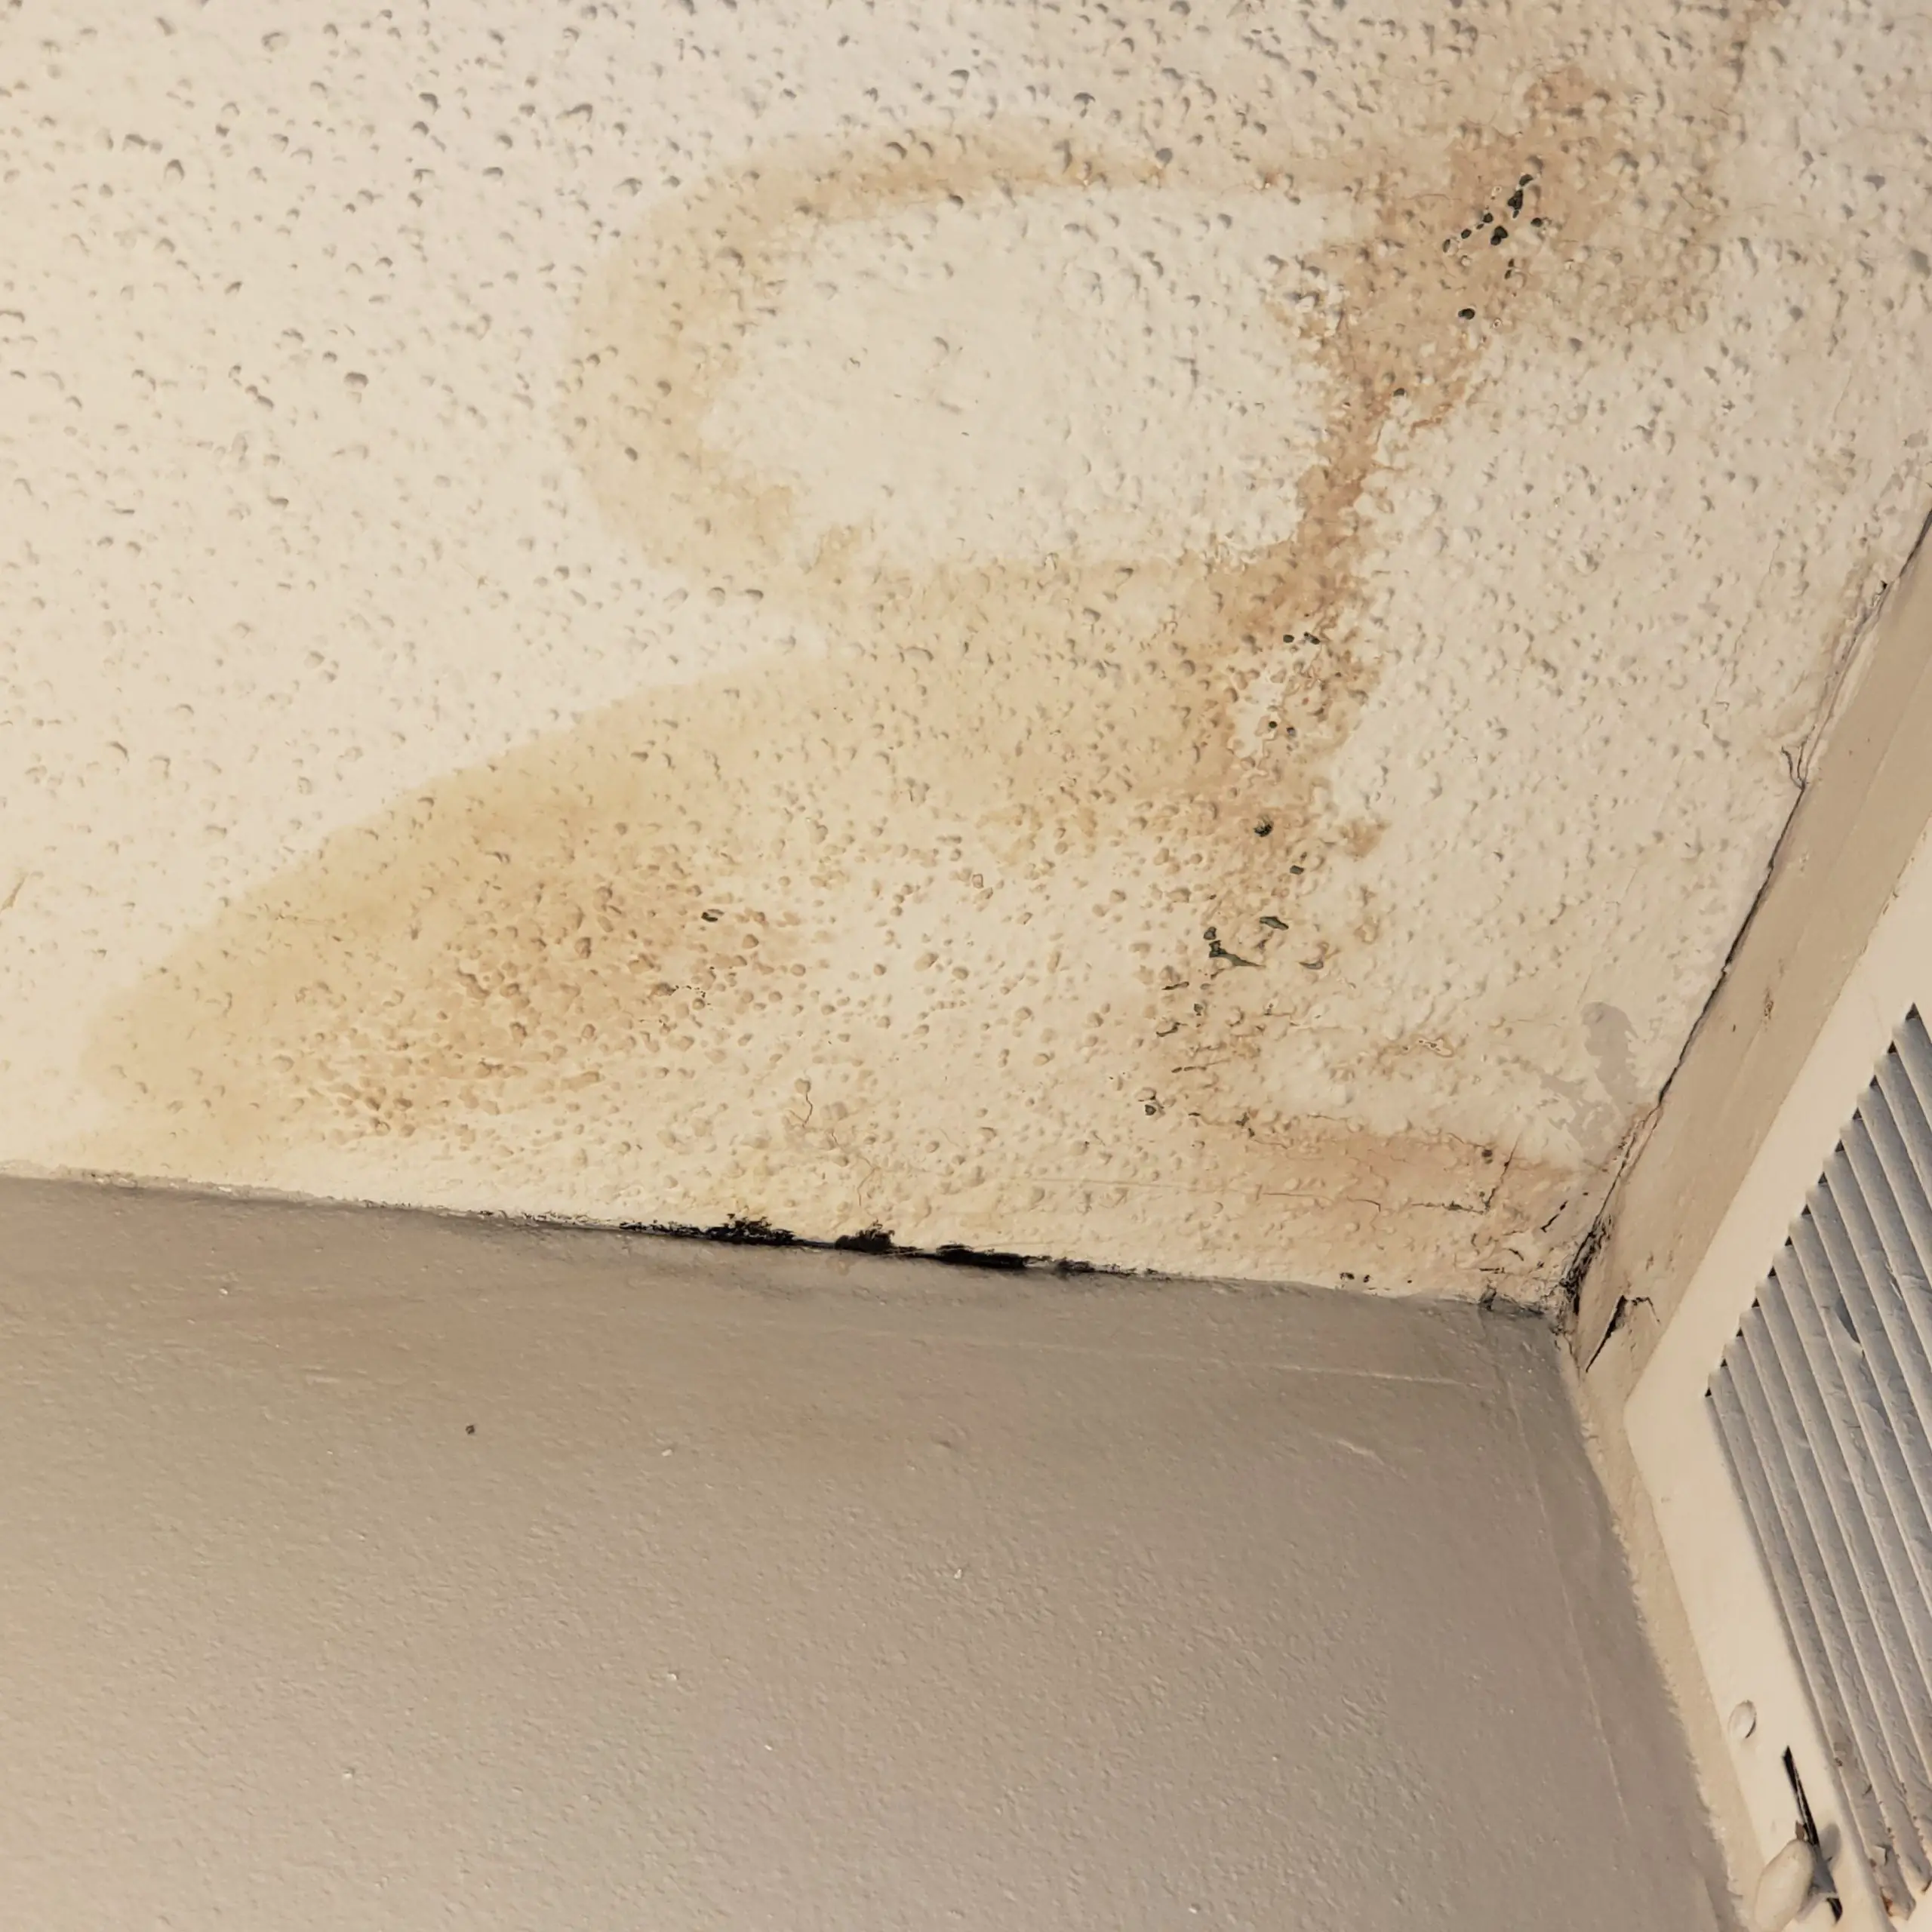 Wondering if this is mold in my apartment. : Mold